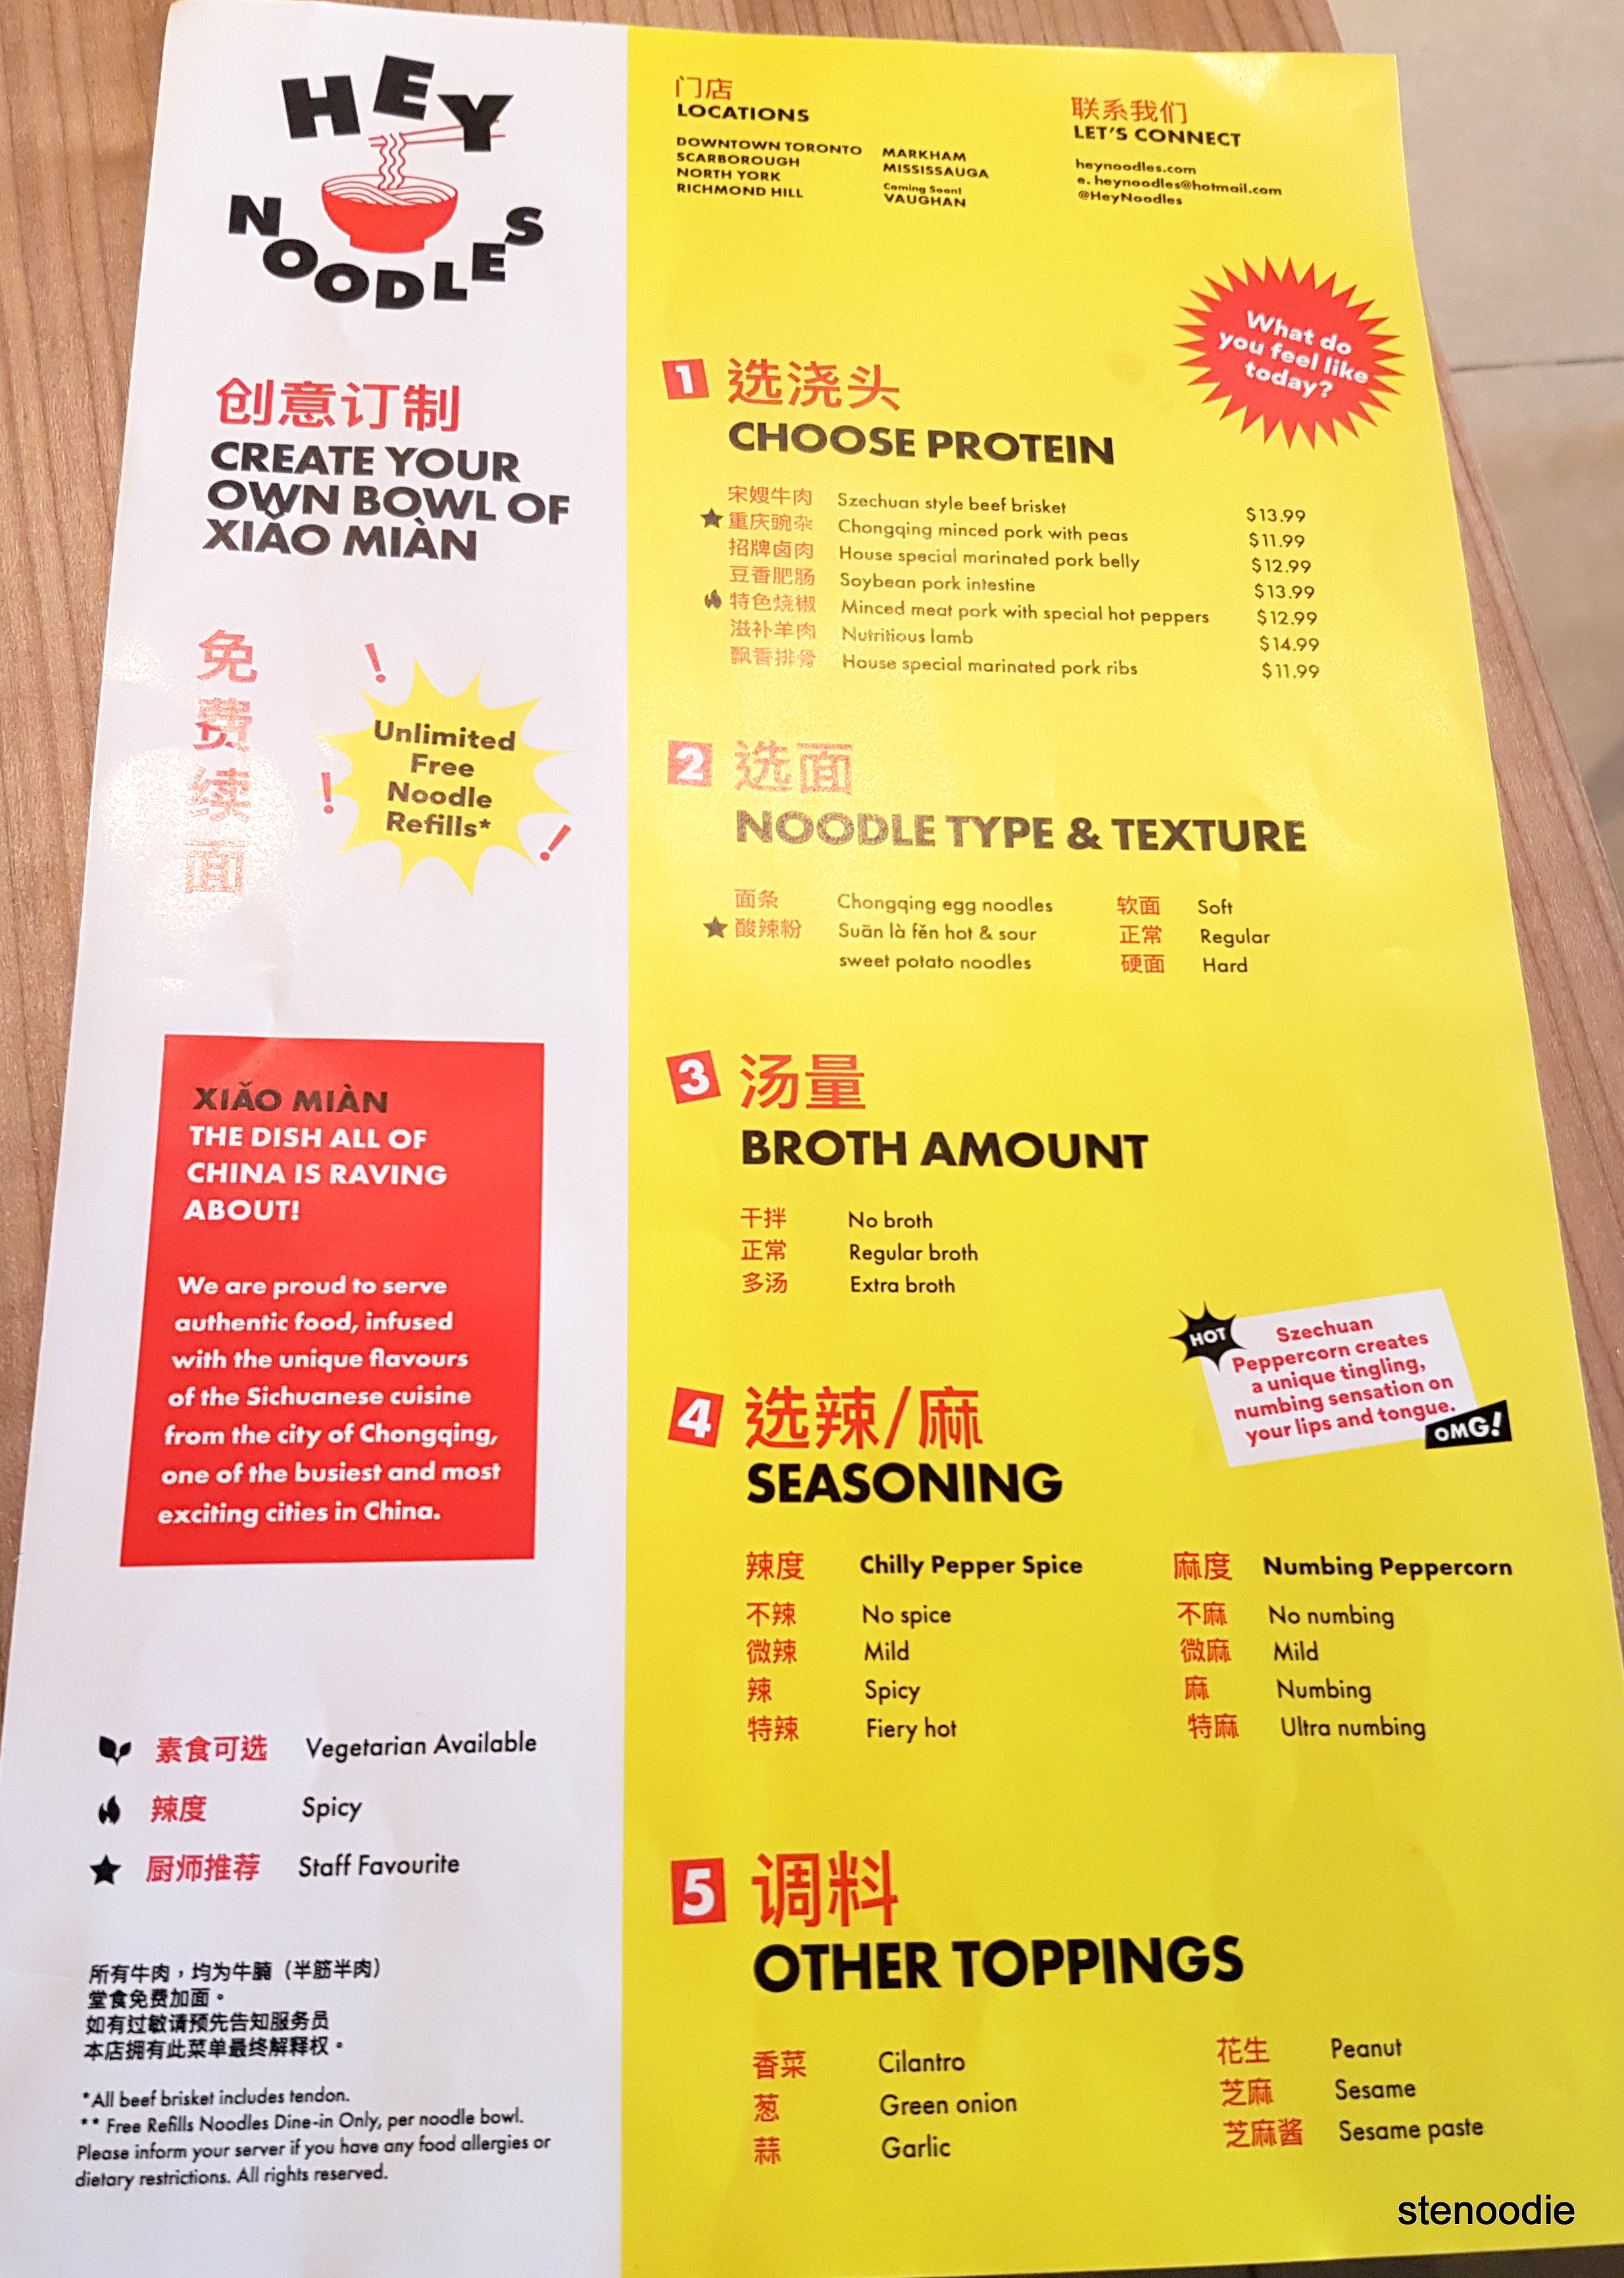  Hey Noodles new menu and prices